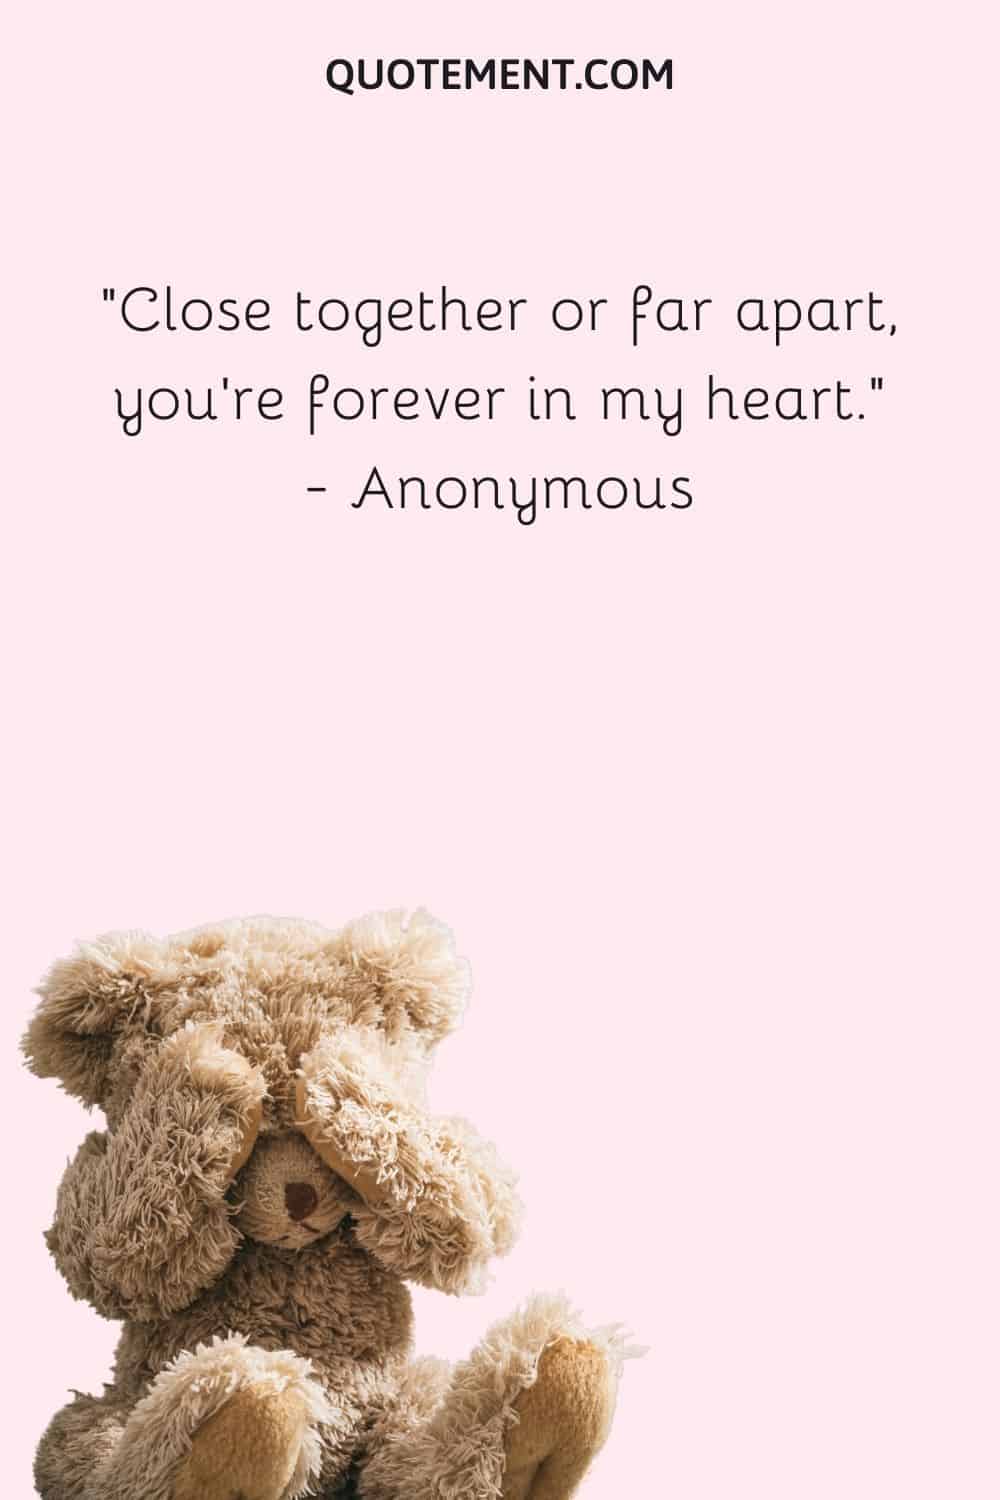 Close together or far apart, you're forever in my heart. — Anonymous